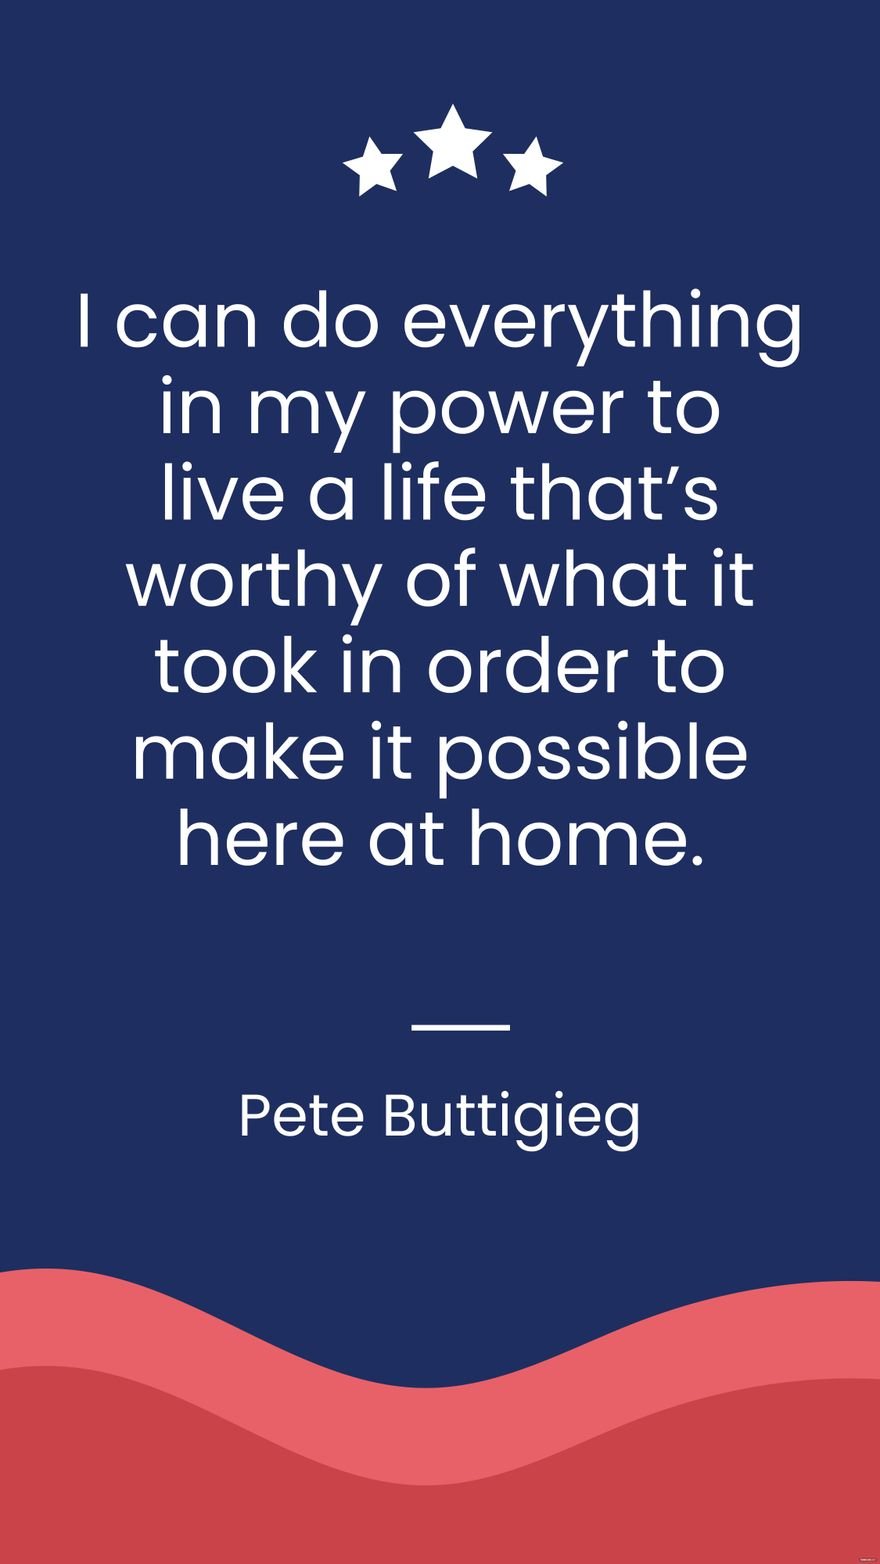 Pete Buttigieg - I can do everything in my power to live a life that's worthy of what it took in order to make it possible to be here at home.